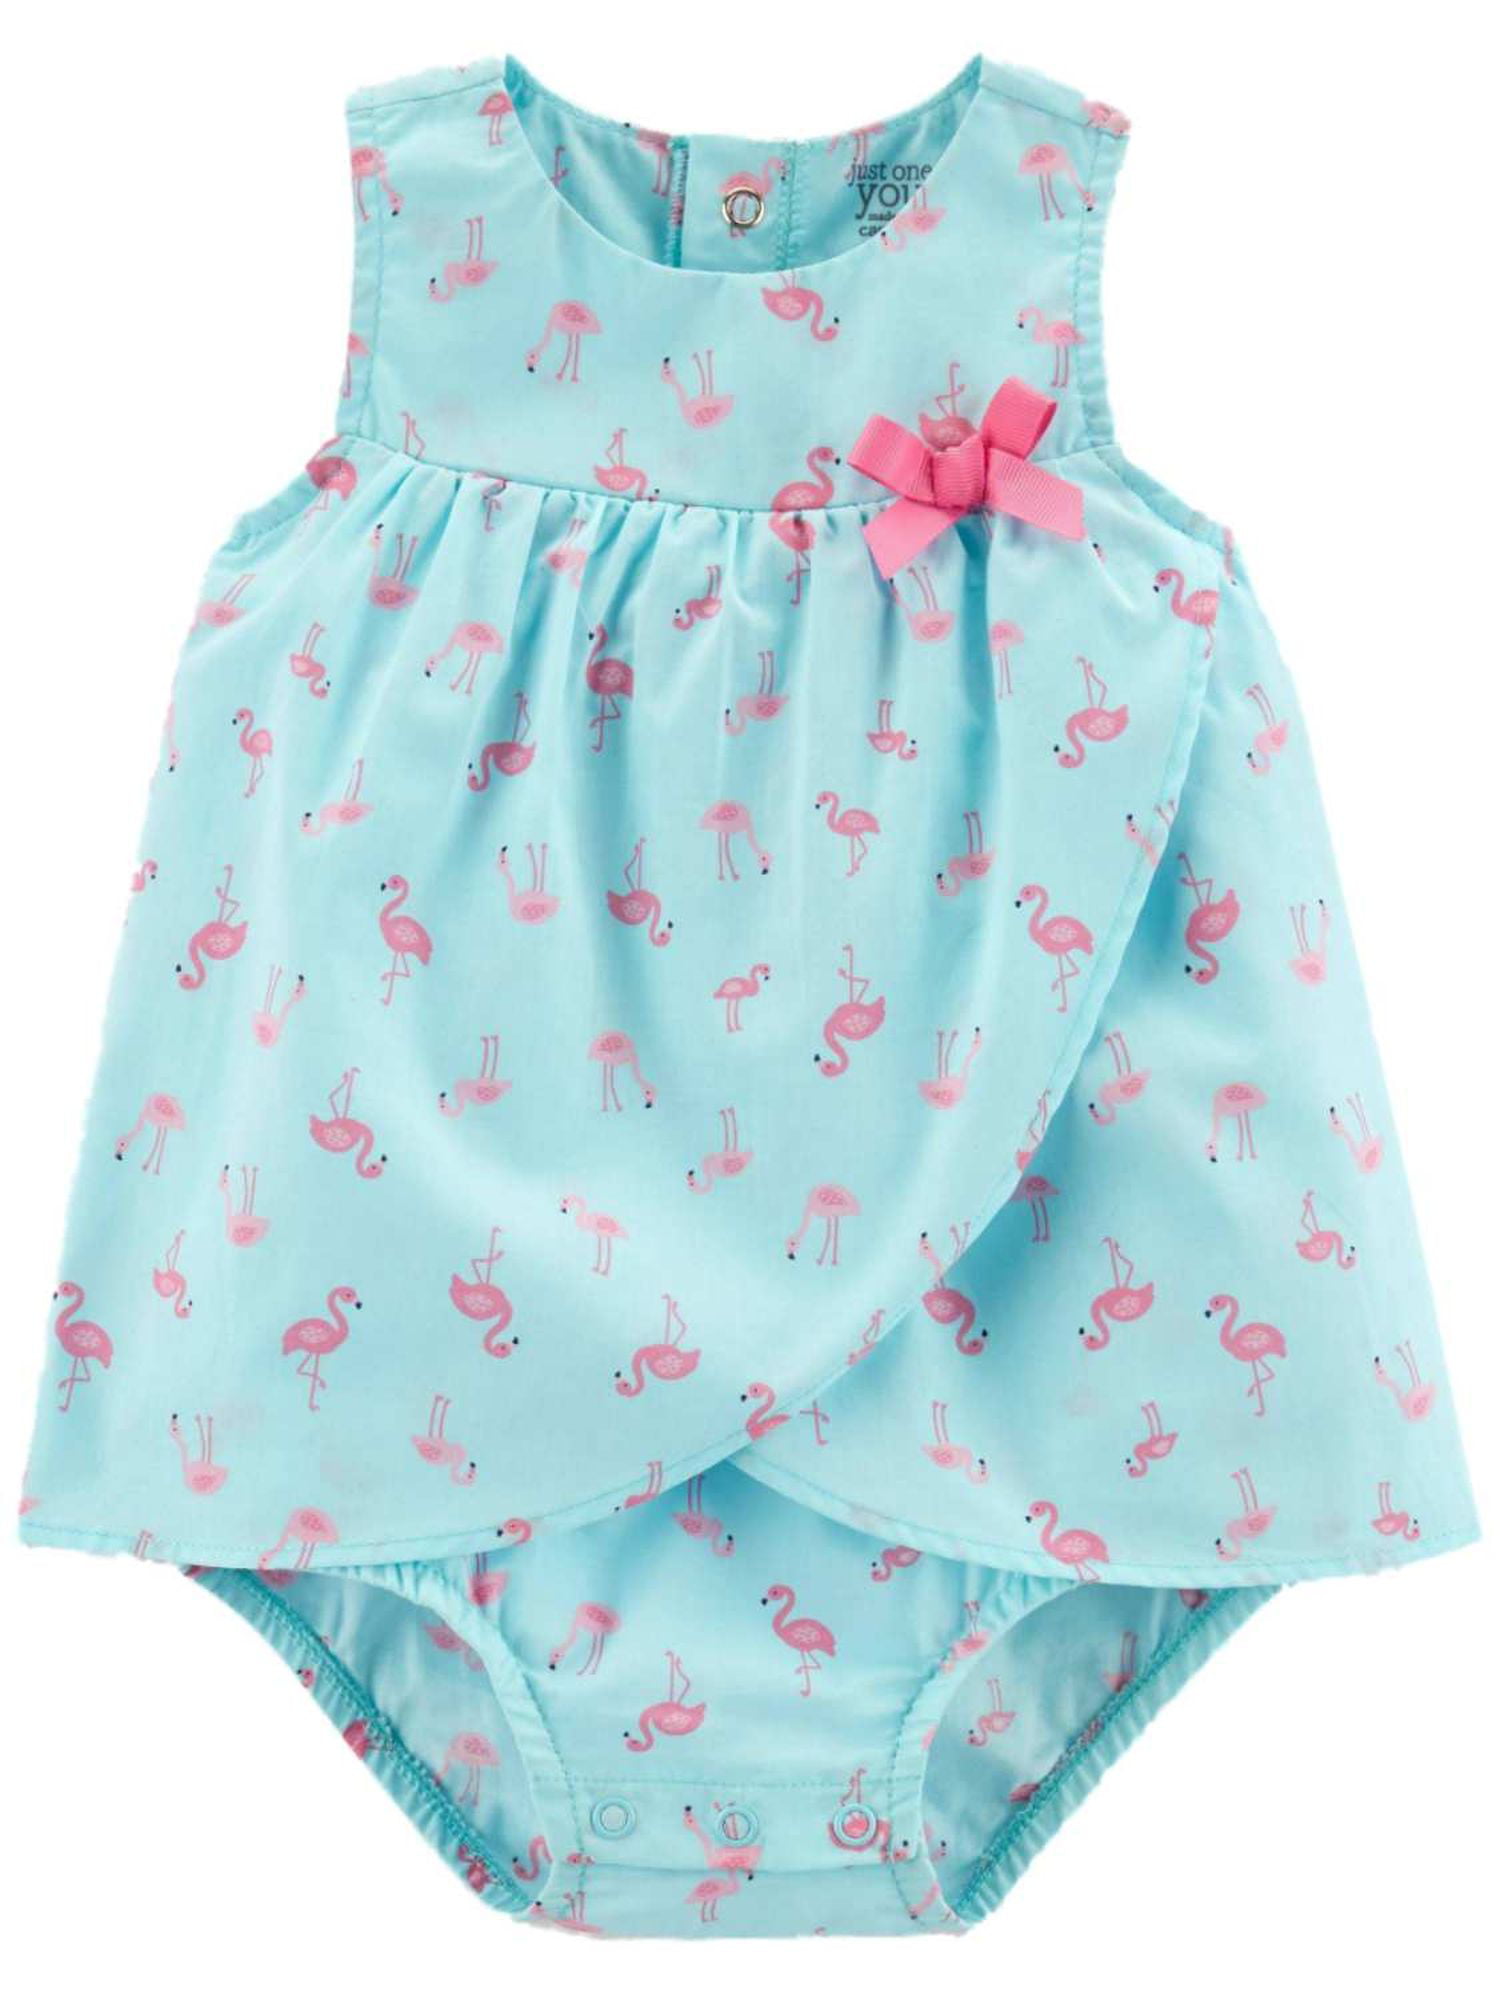 New Carter's Girls 1 Piece Outfit Heart Rainbow Summer Romper NWT 9m 12m 18m 24m 